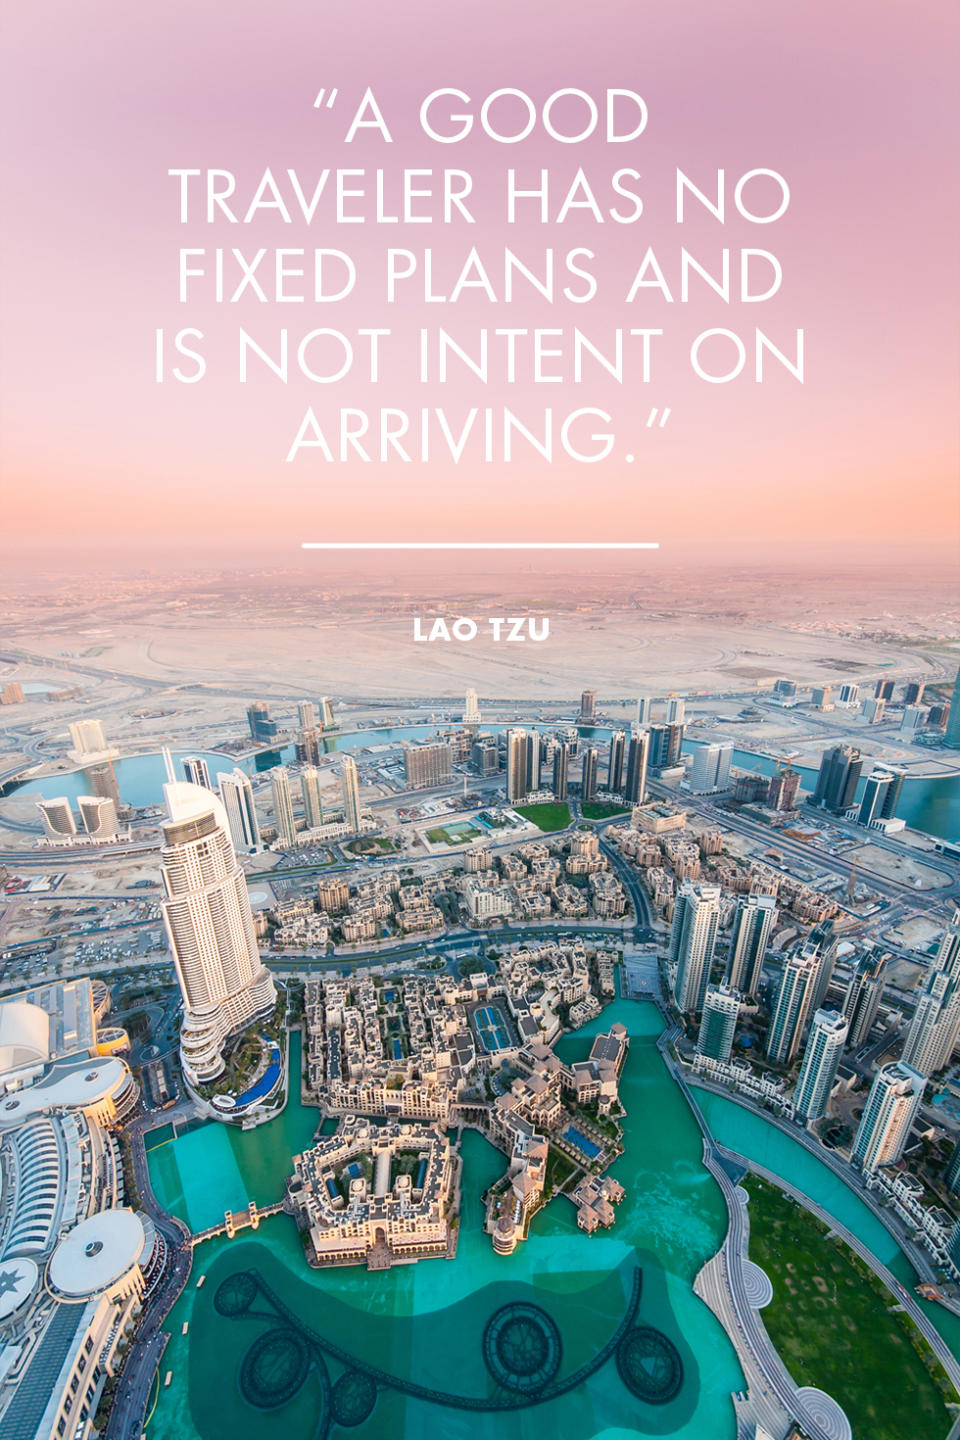 <p>"A good traveler has no fixed plans and is not intent on arriving." - Lao Tzu</p><p>Photo: Dubai, United Arab Emirates</p>